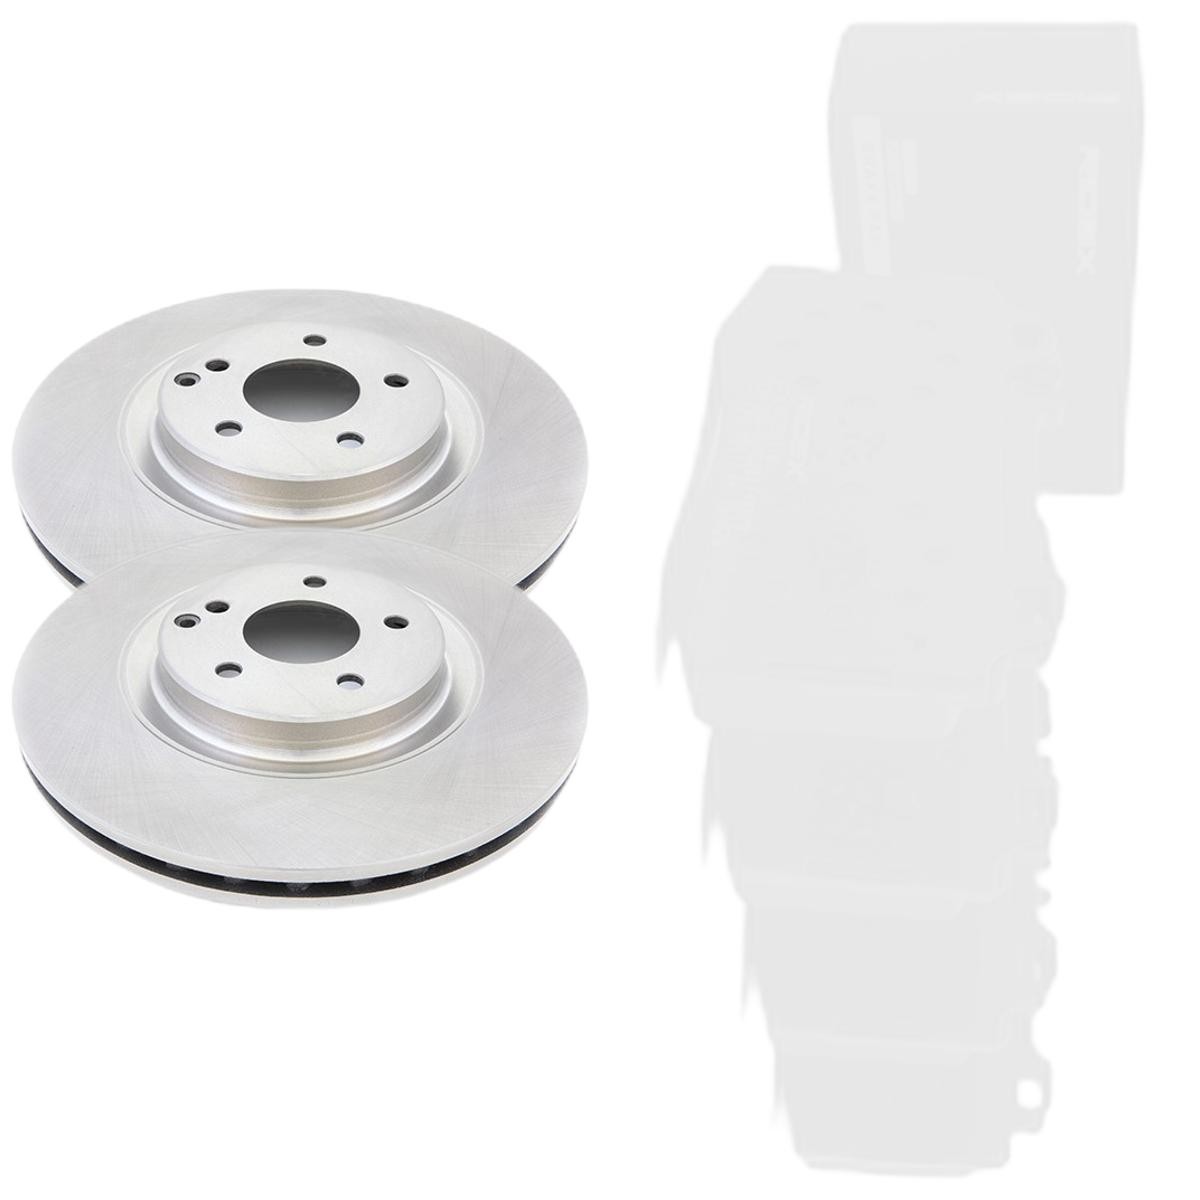 RIDEX Brake disc and pads set 3405B2774 suitable for MERCEDES-BENZ C-Class, CLK